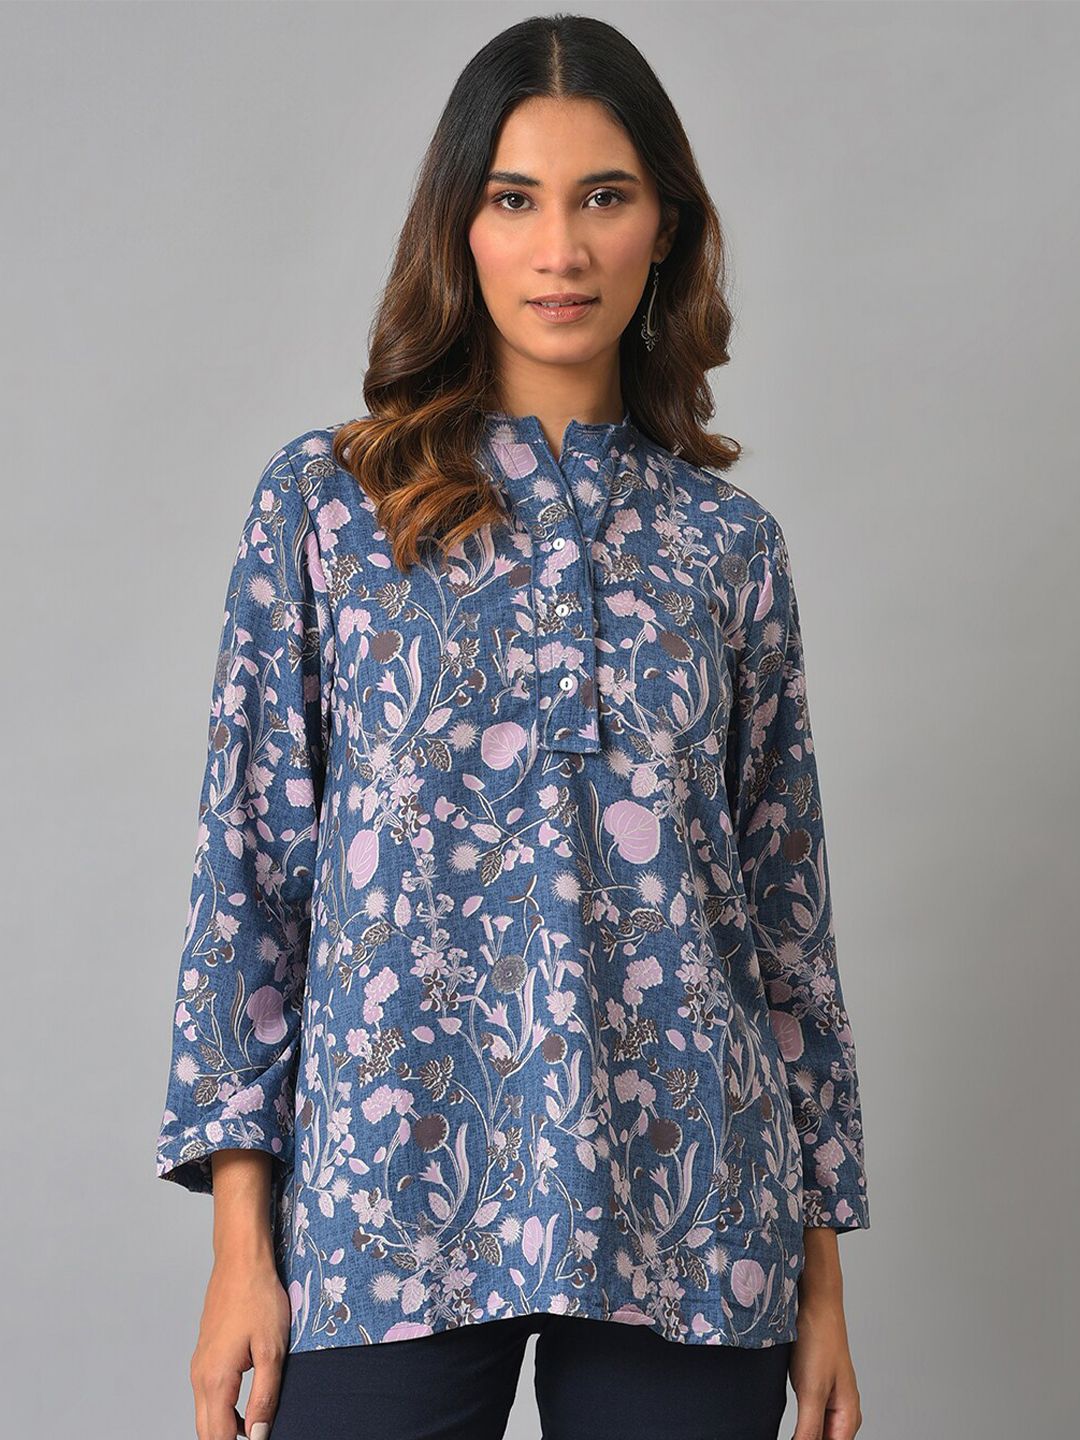 W Blue Floral Print Mandarin Collar Shirt Style Top Price in India